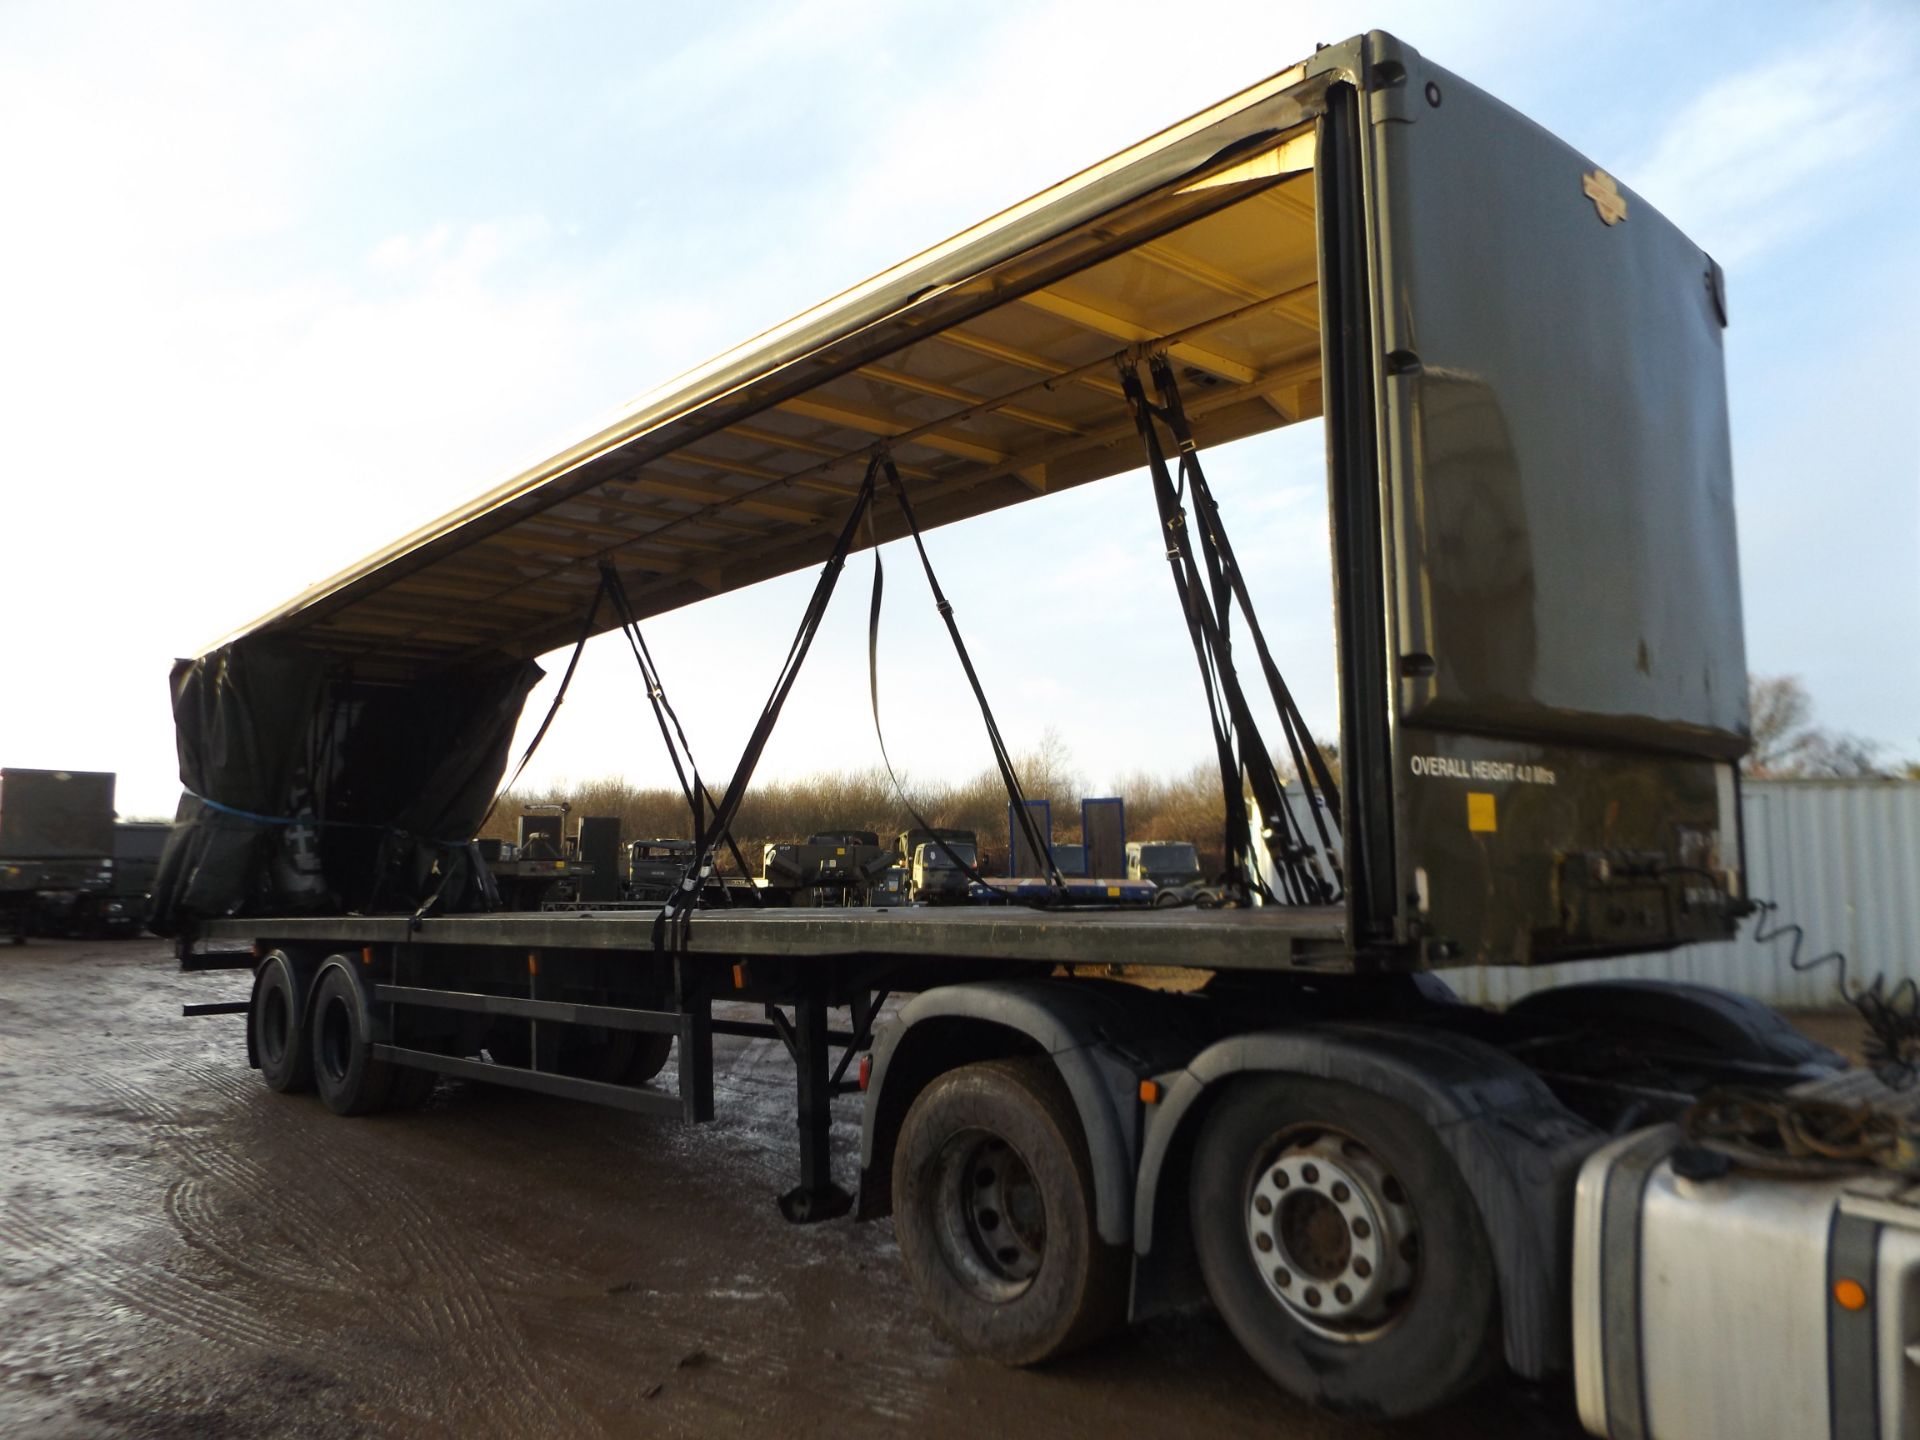 M&G Twin Axle Curtain Sider Trailer with Boalloy Body